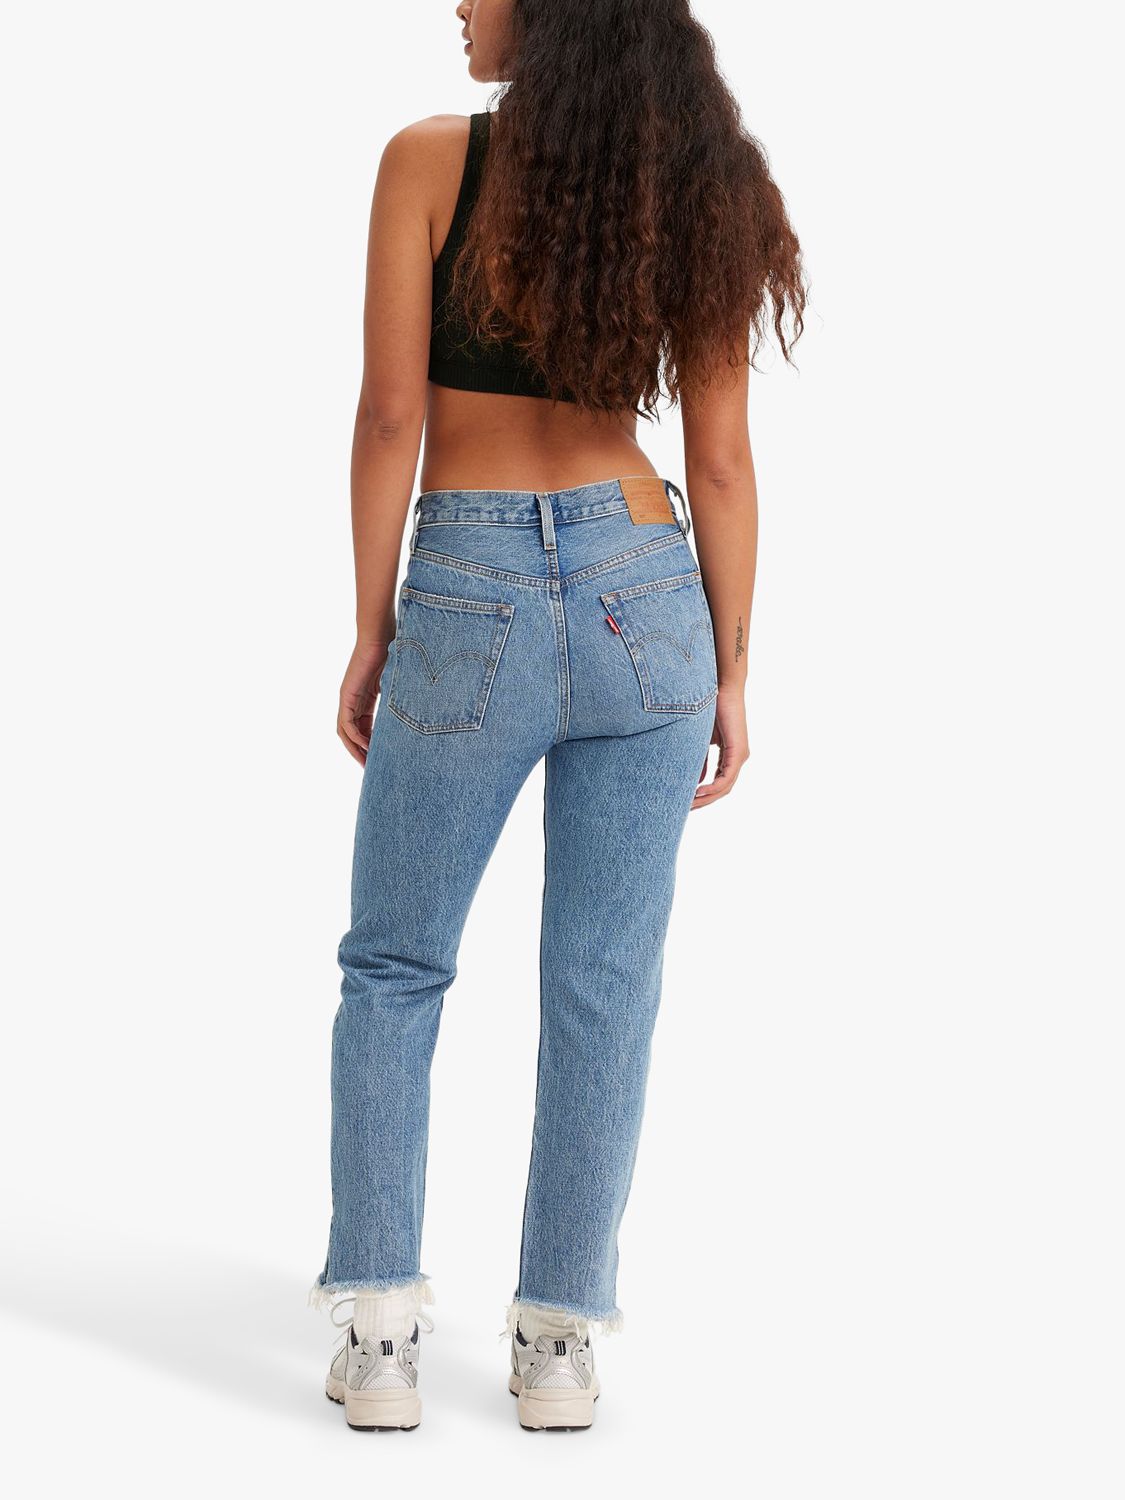 Levi's 501 Cropped Distressed Jeans, Face It at John Lewis & Partners